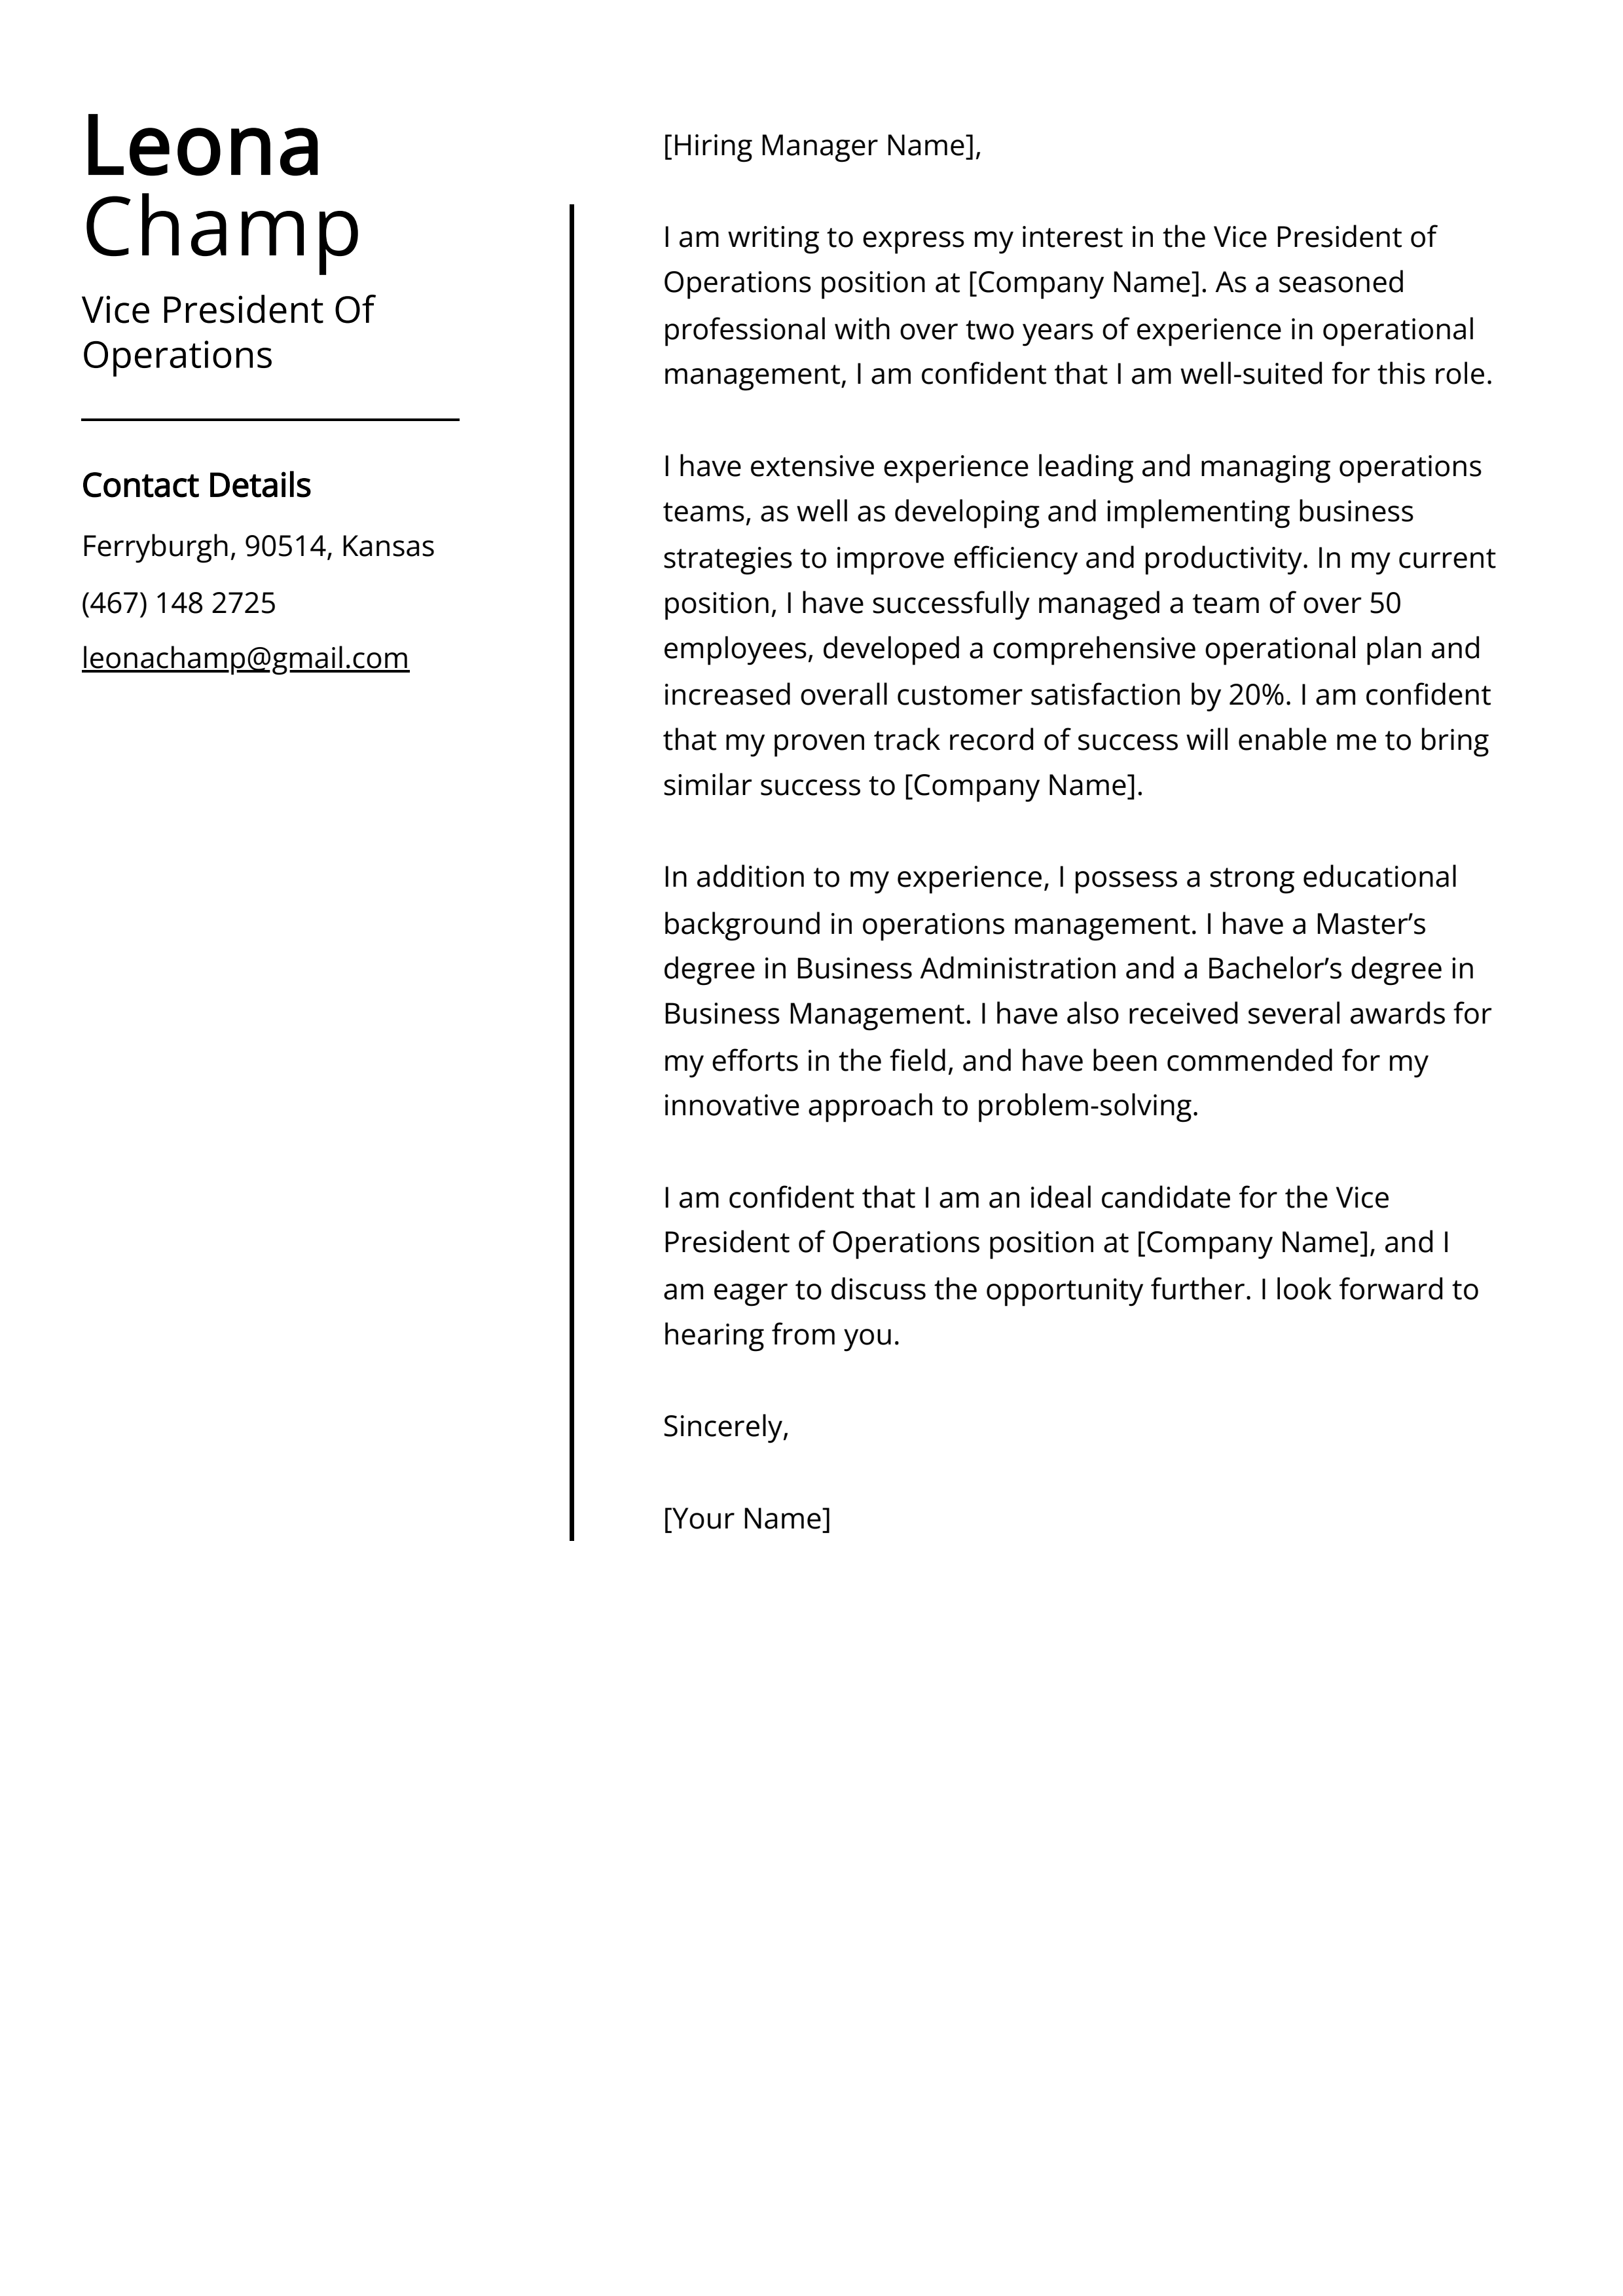 Vice President Of Operations Cover Letter Example